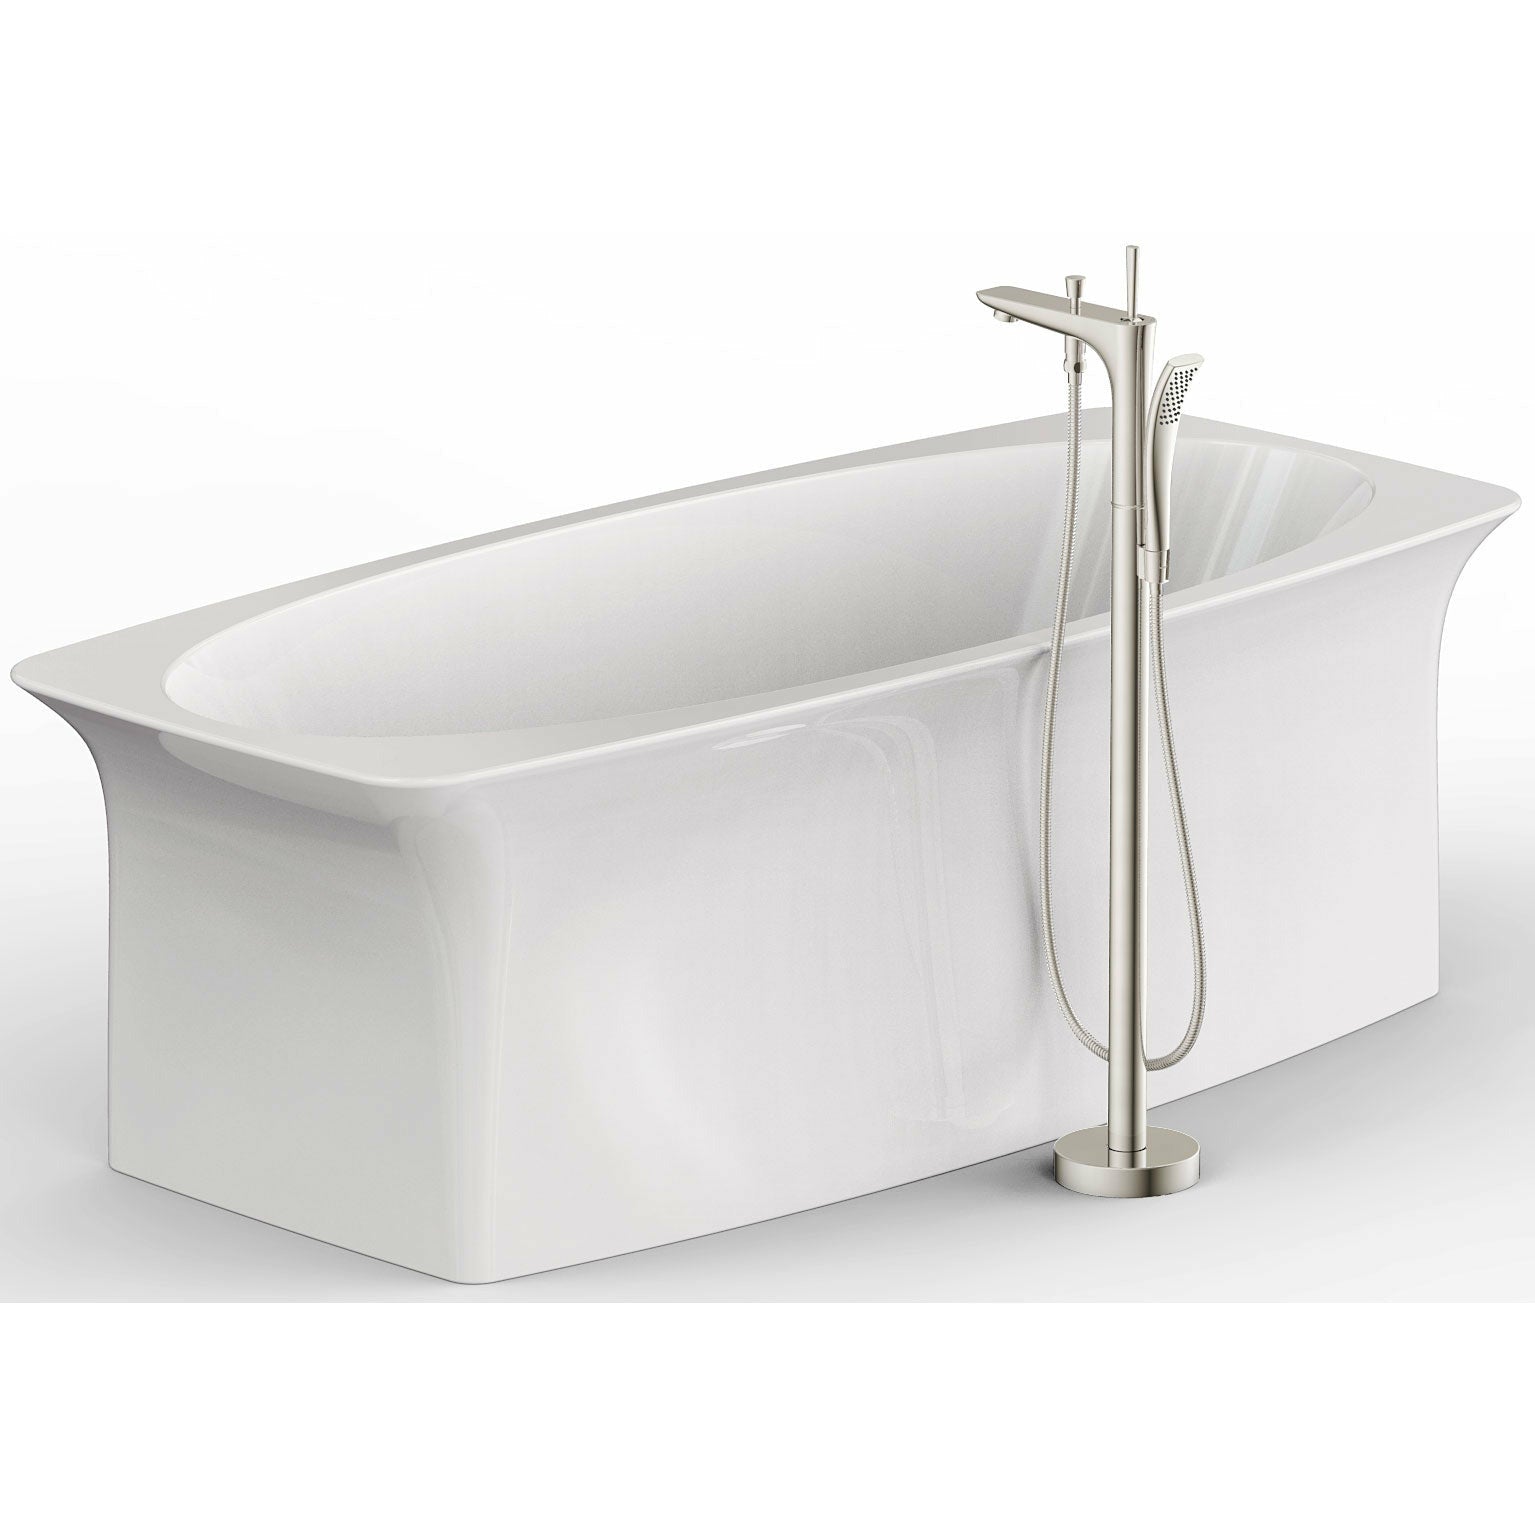 Anzzi Kase Series 1-Handle Freestanding Claw Foot Tub Faucet with Hand Shower in Brushed Nickel FS-AZ0029BN - Vital Hydrotherapy